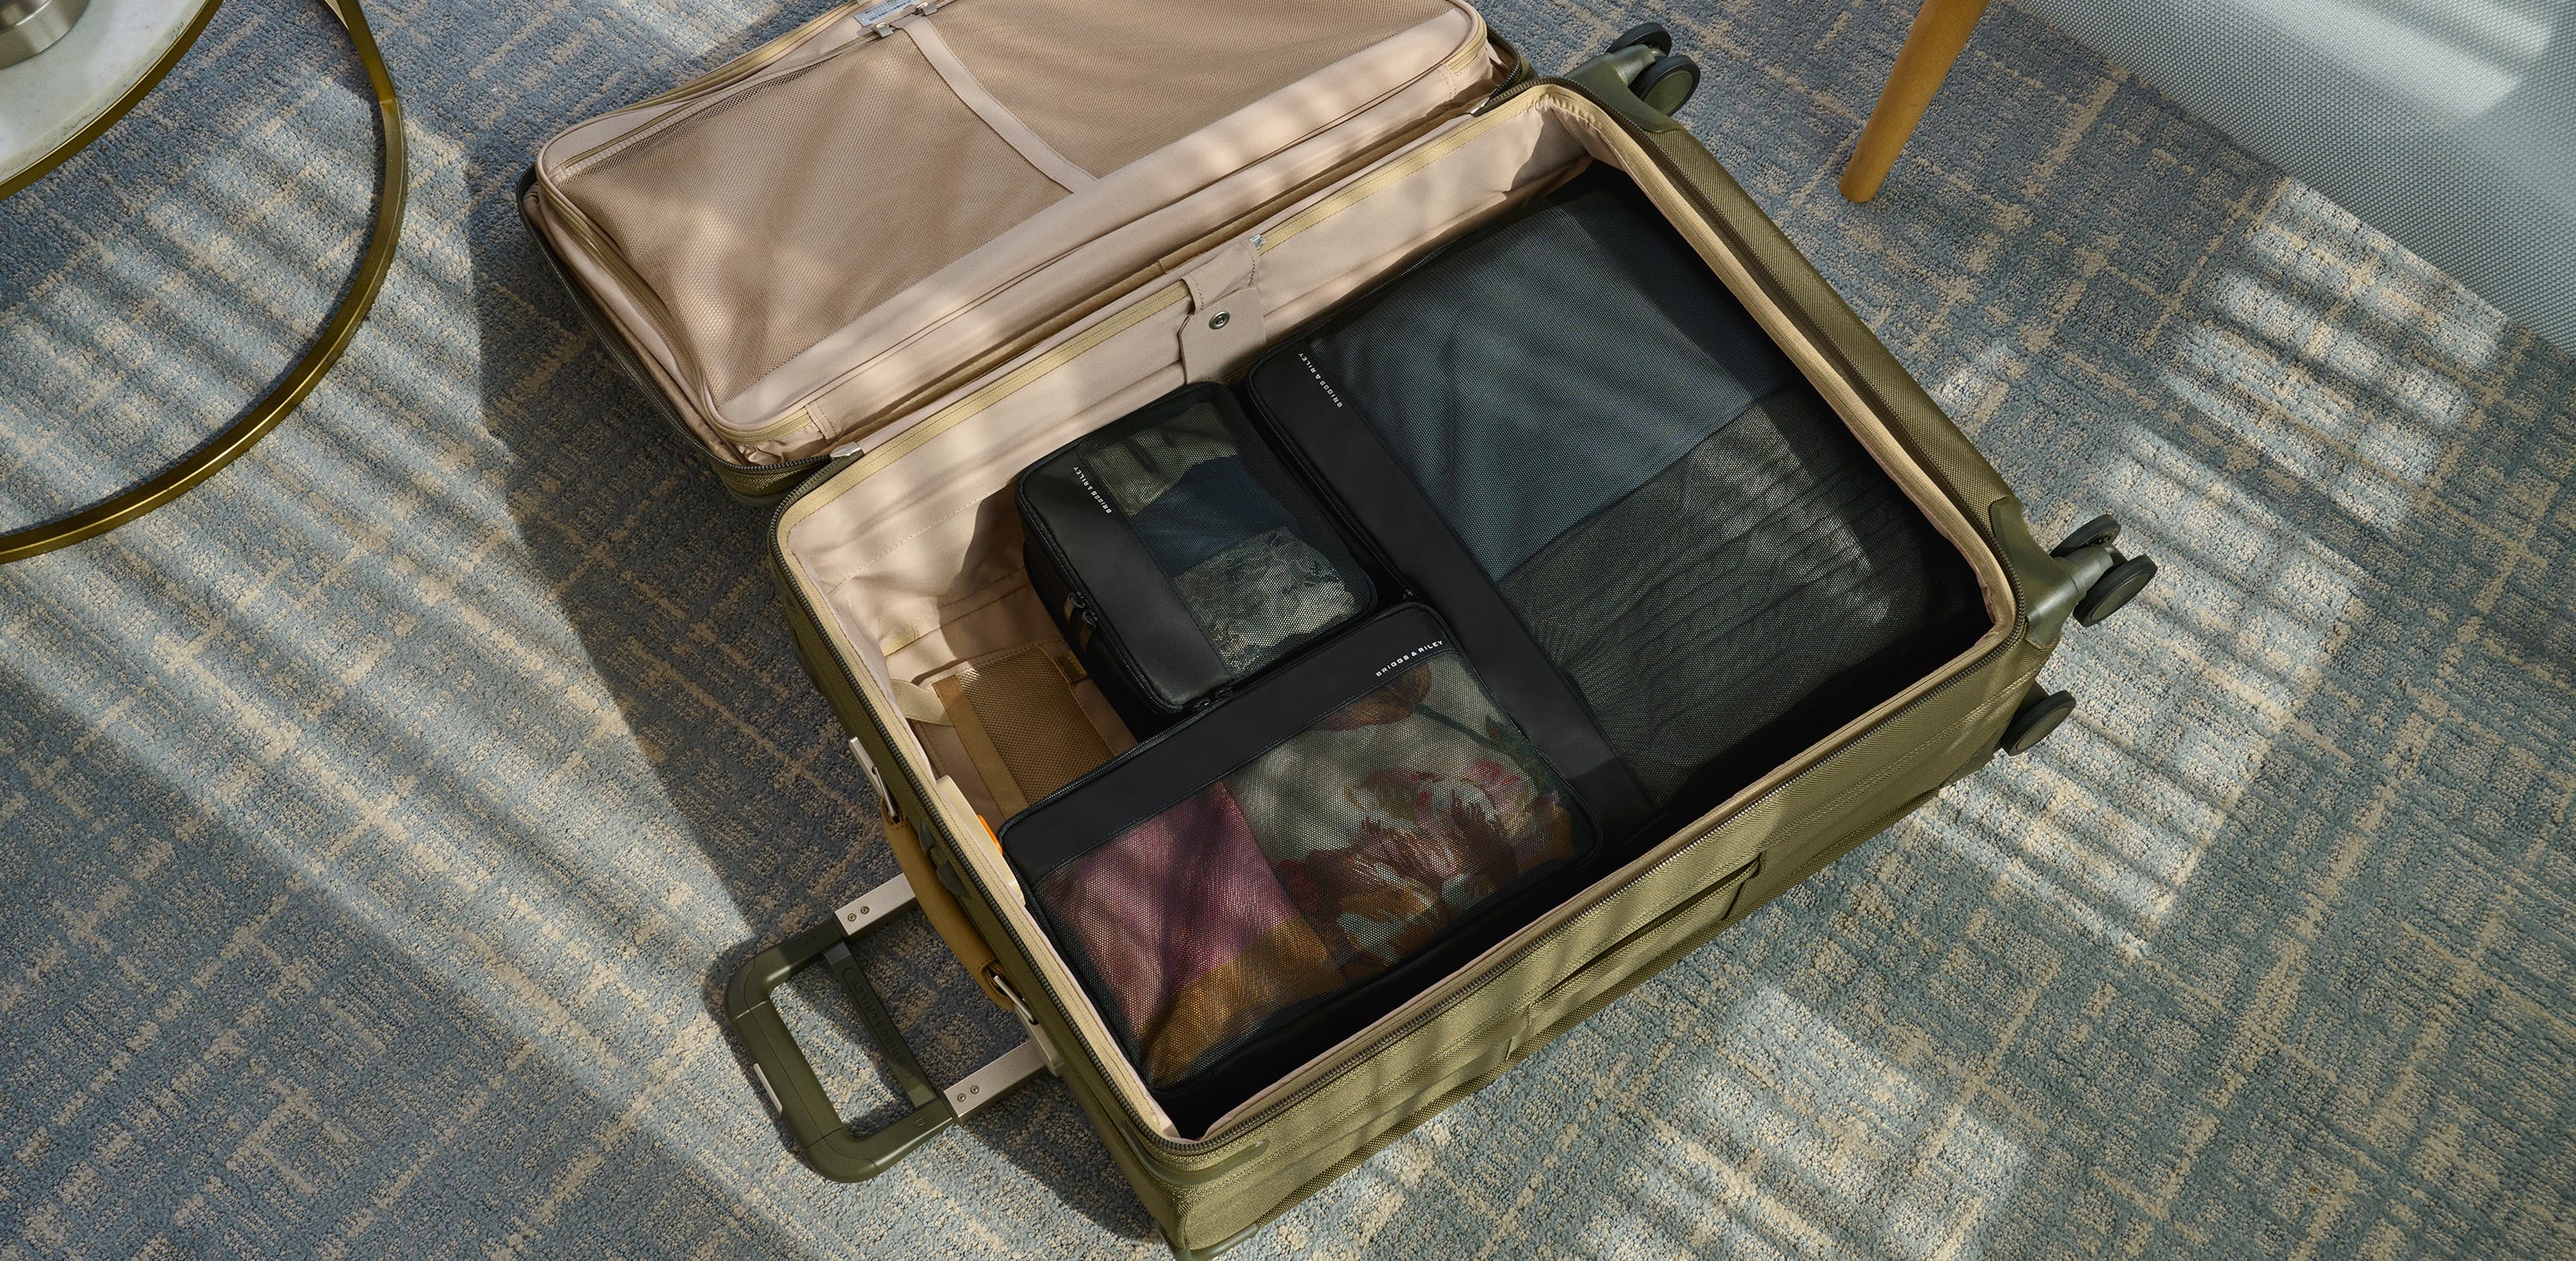 Luggage Essentials for Smart Travelers